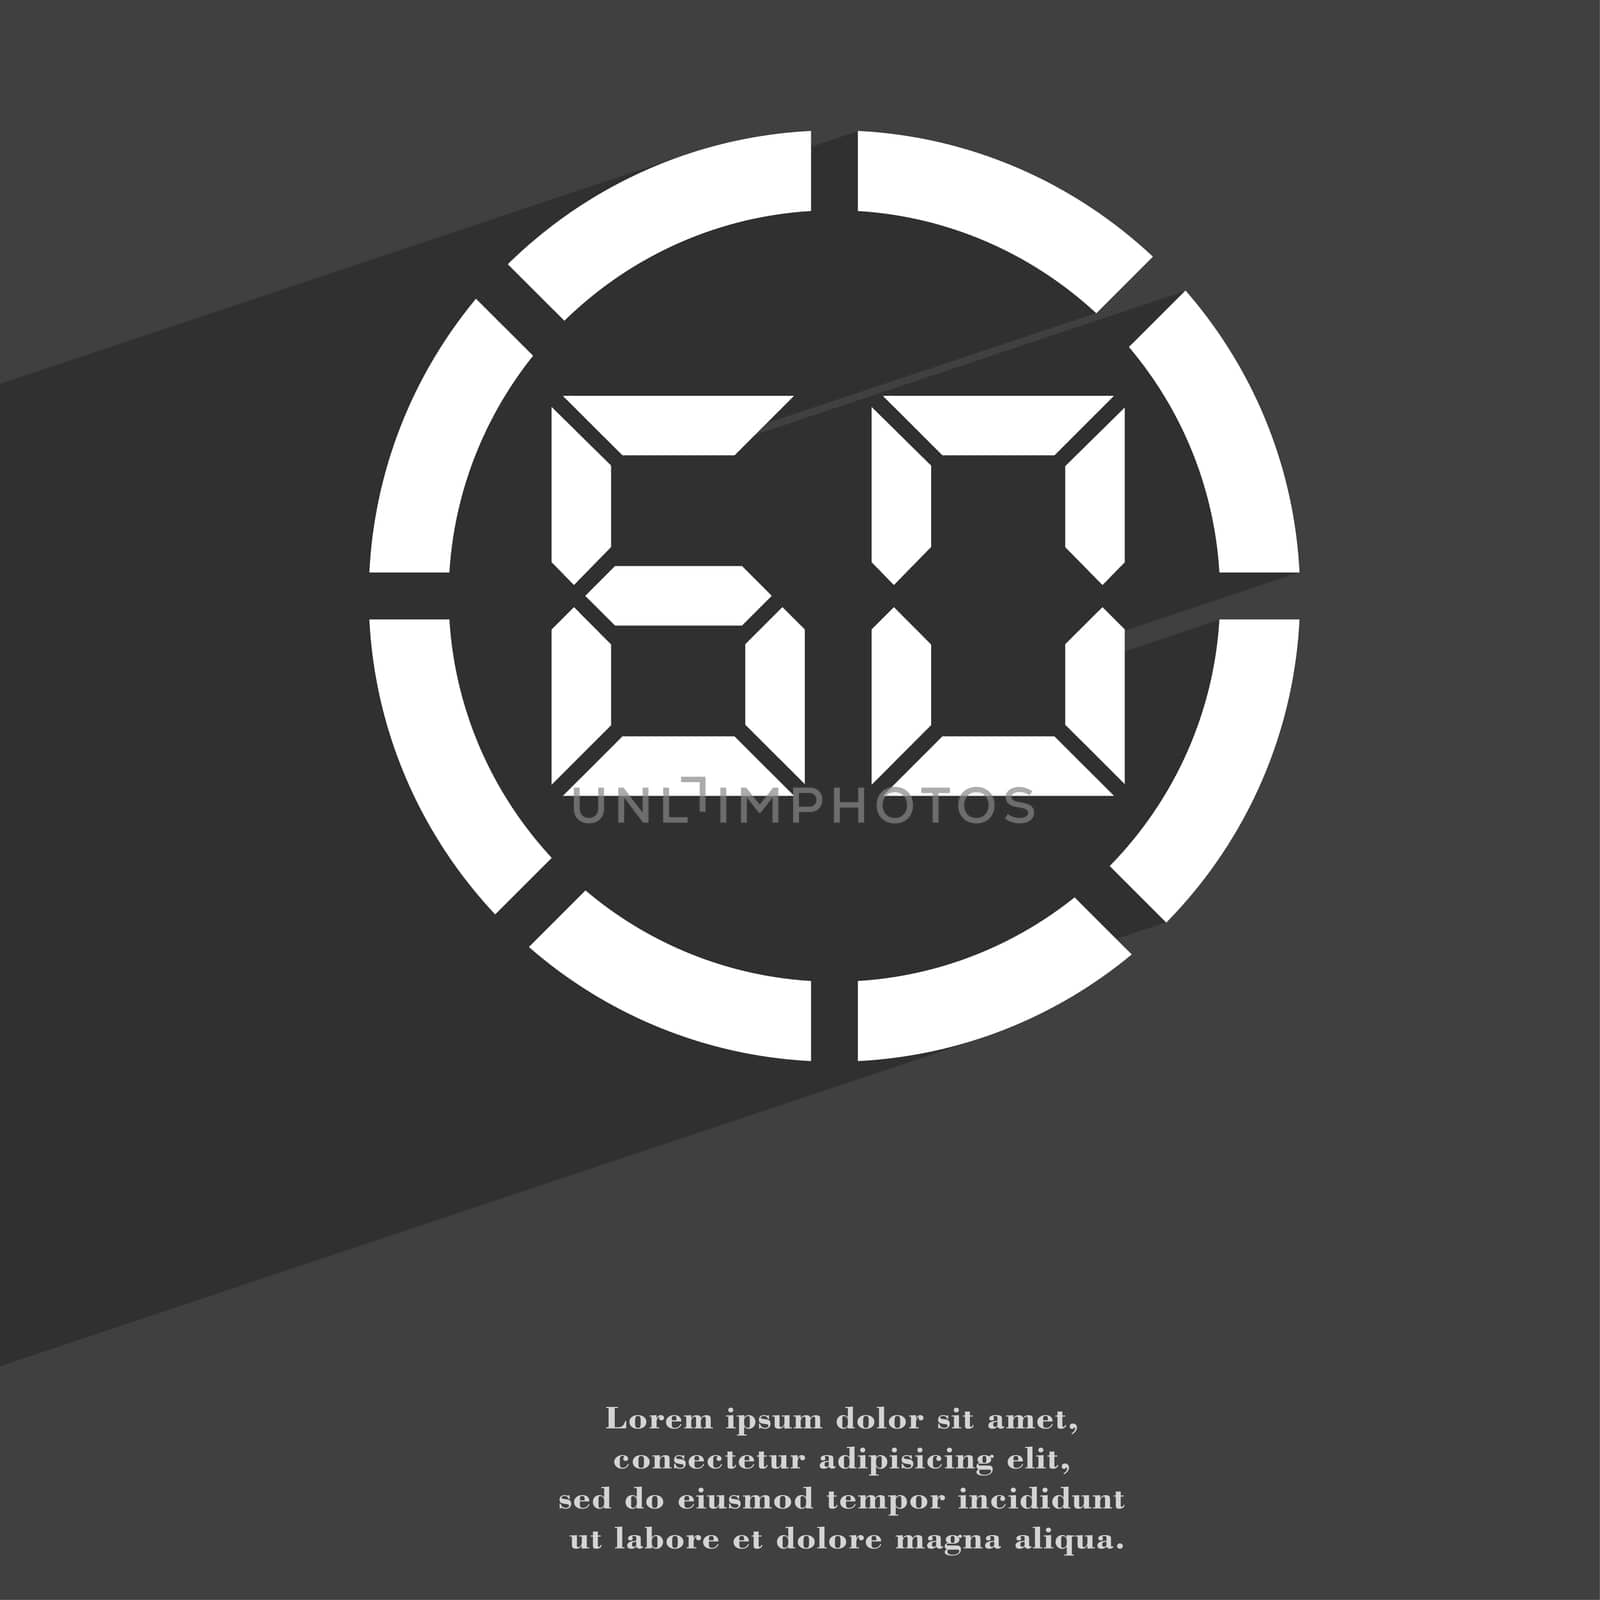 60 second stopwatch icon symbol Flat modern web design with long shadow and space for your text. illustration